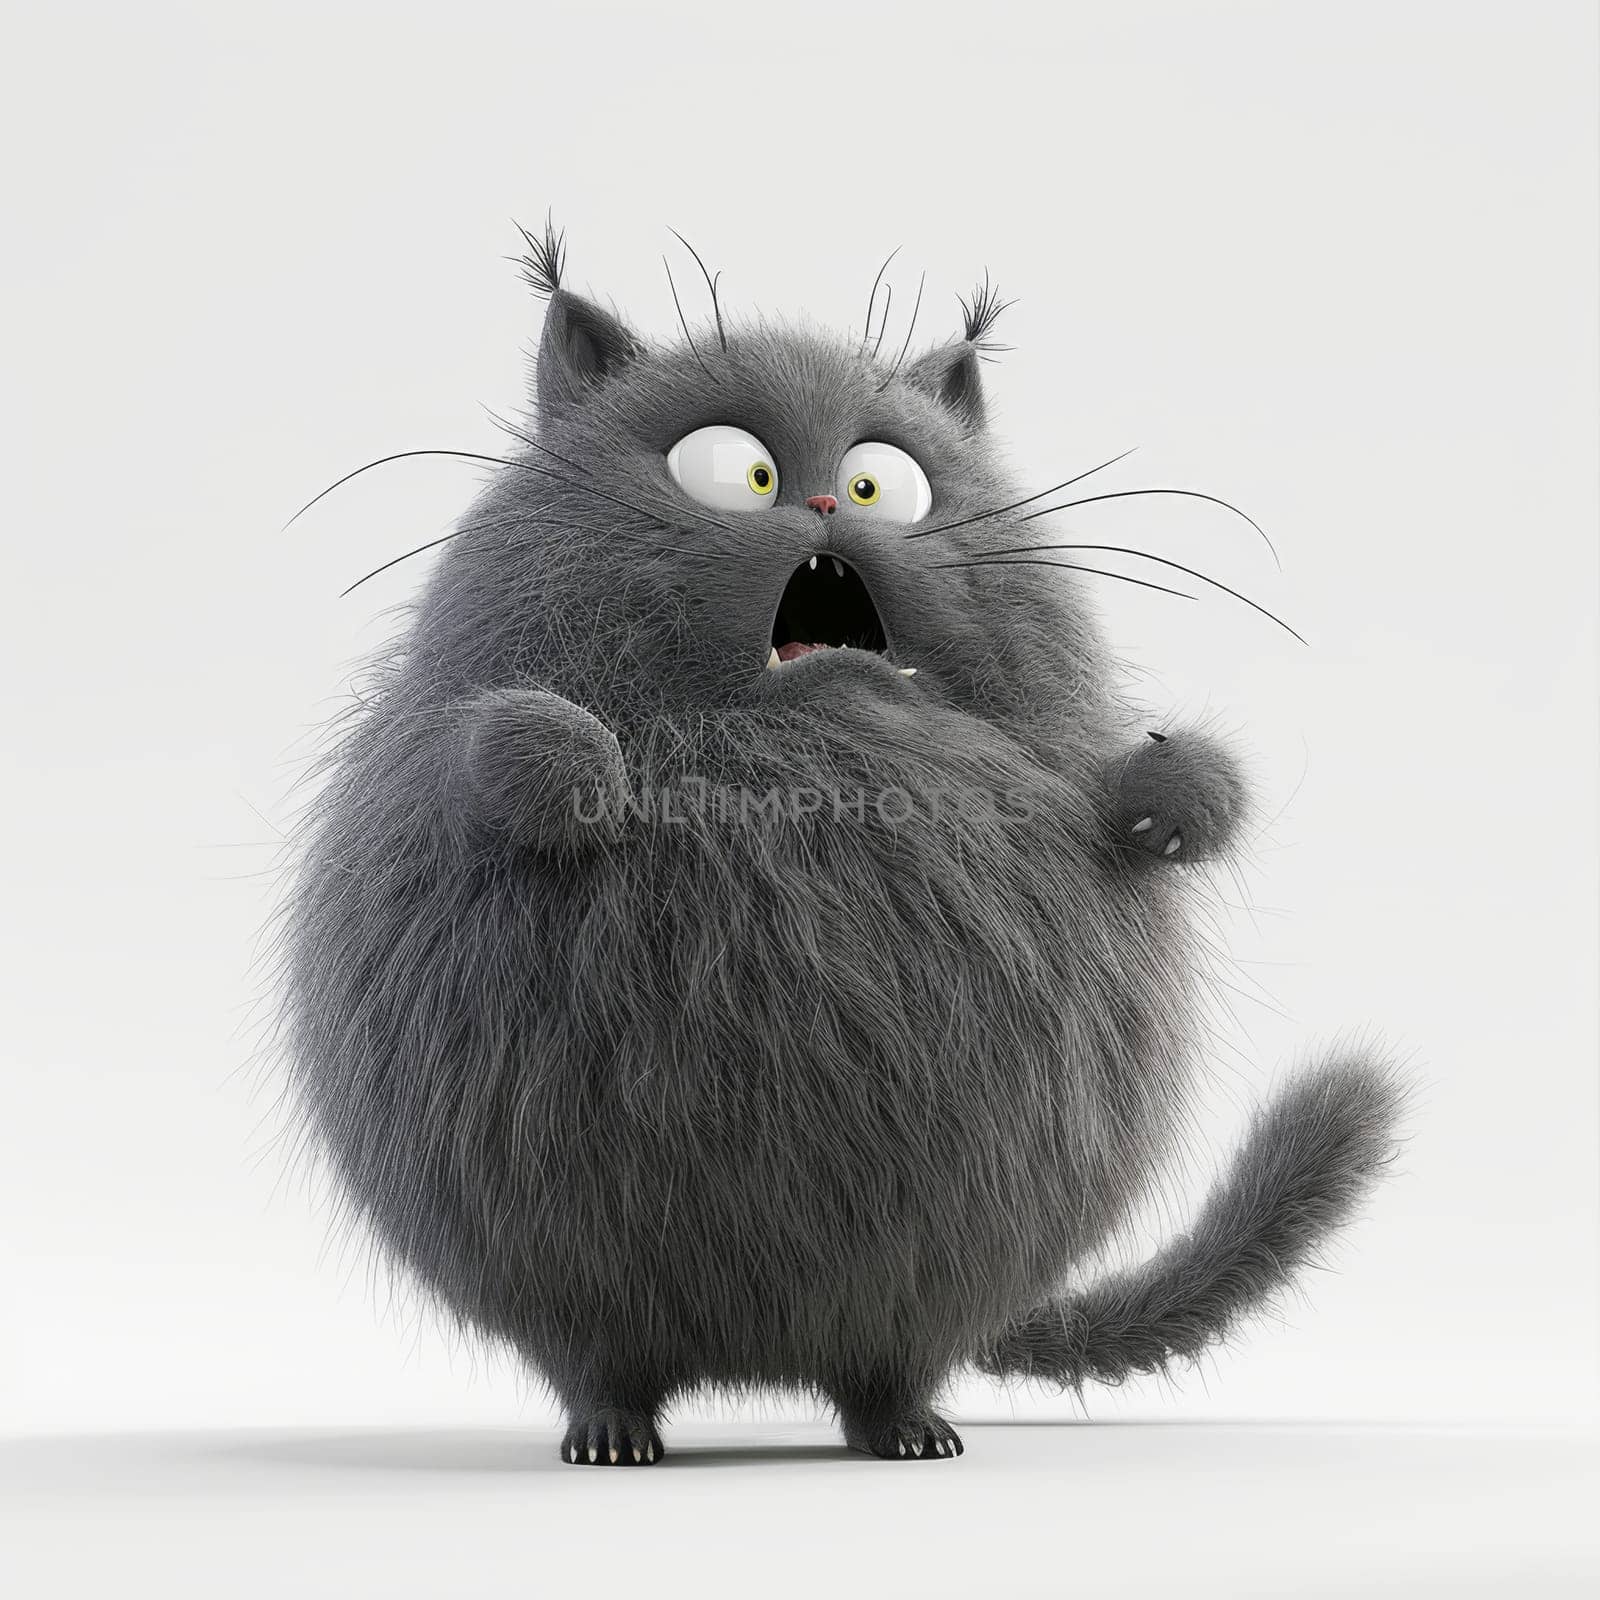 the character of a fat cute fluffy grey cat on a white background. 3d illustration.